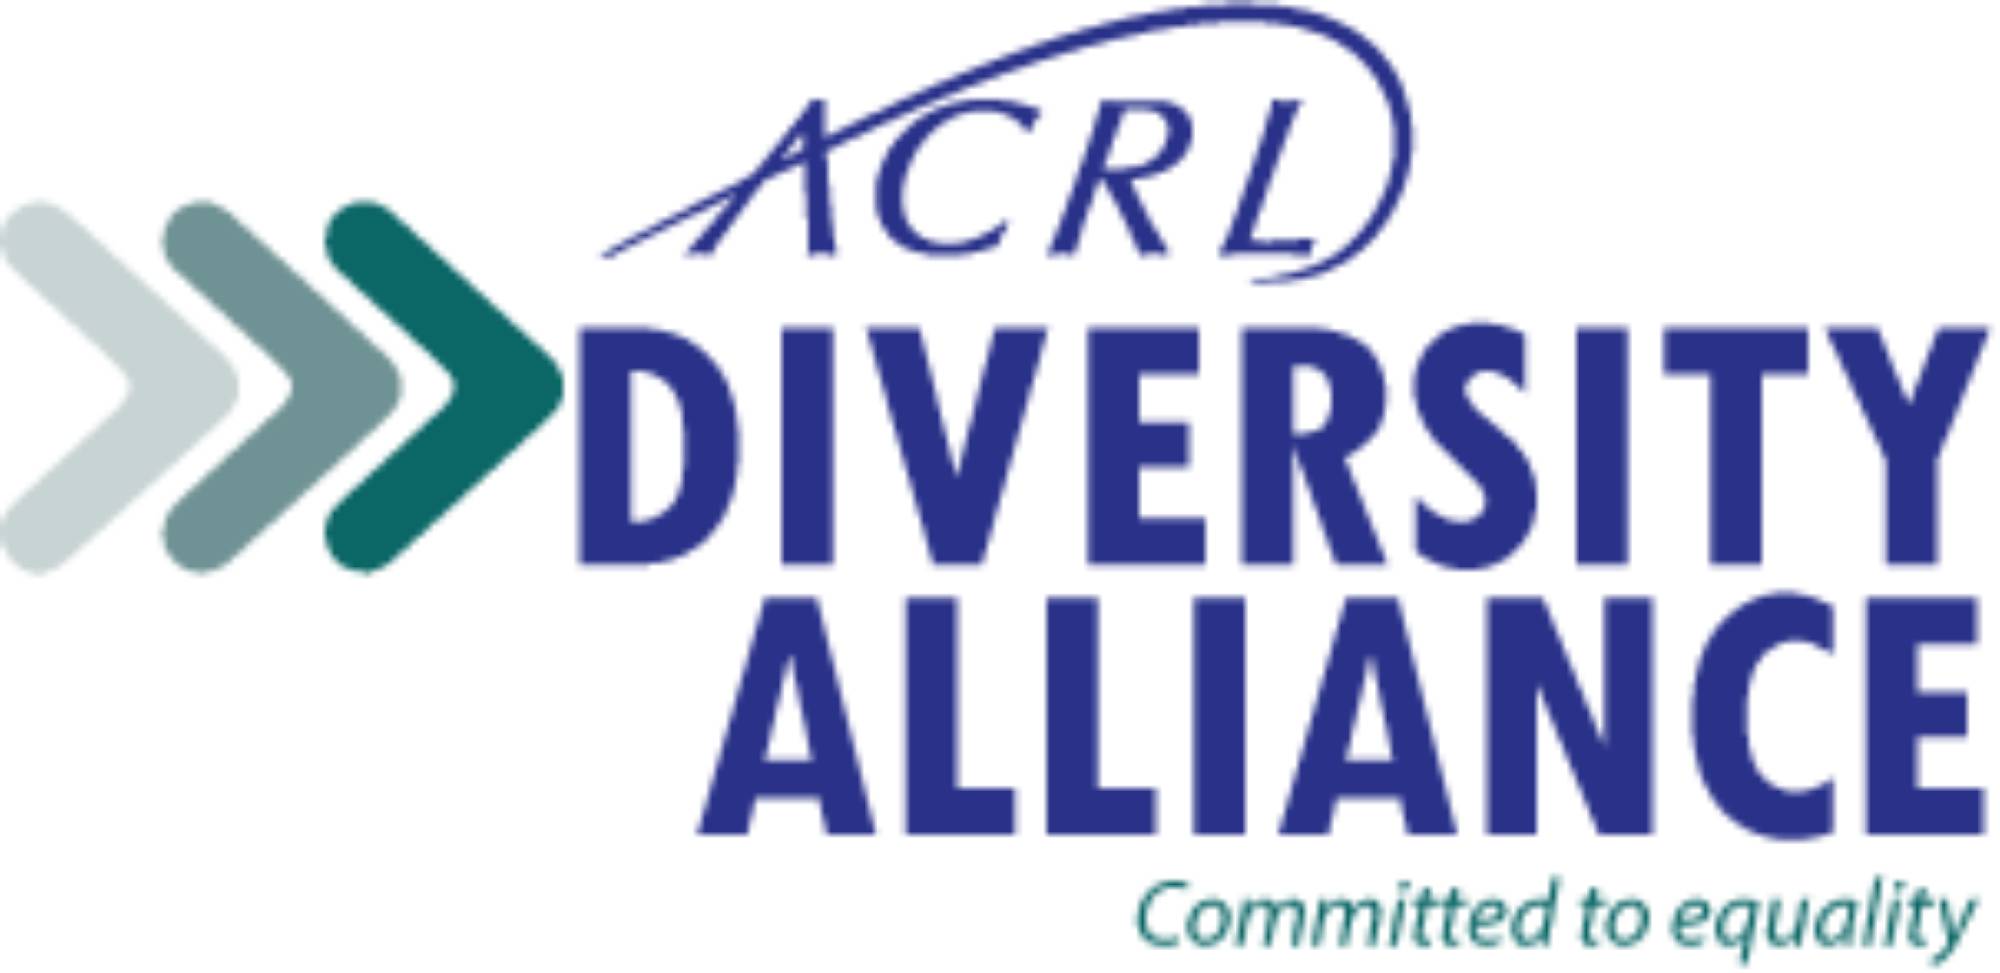 ACRL Diversity Alliance Committed to Equality